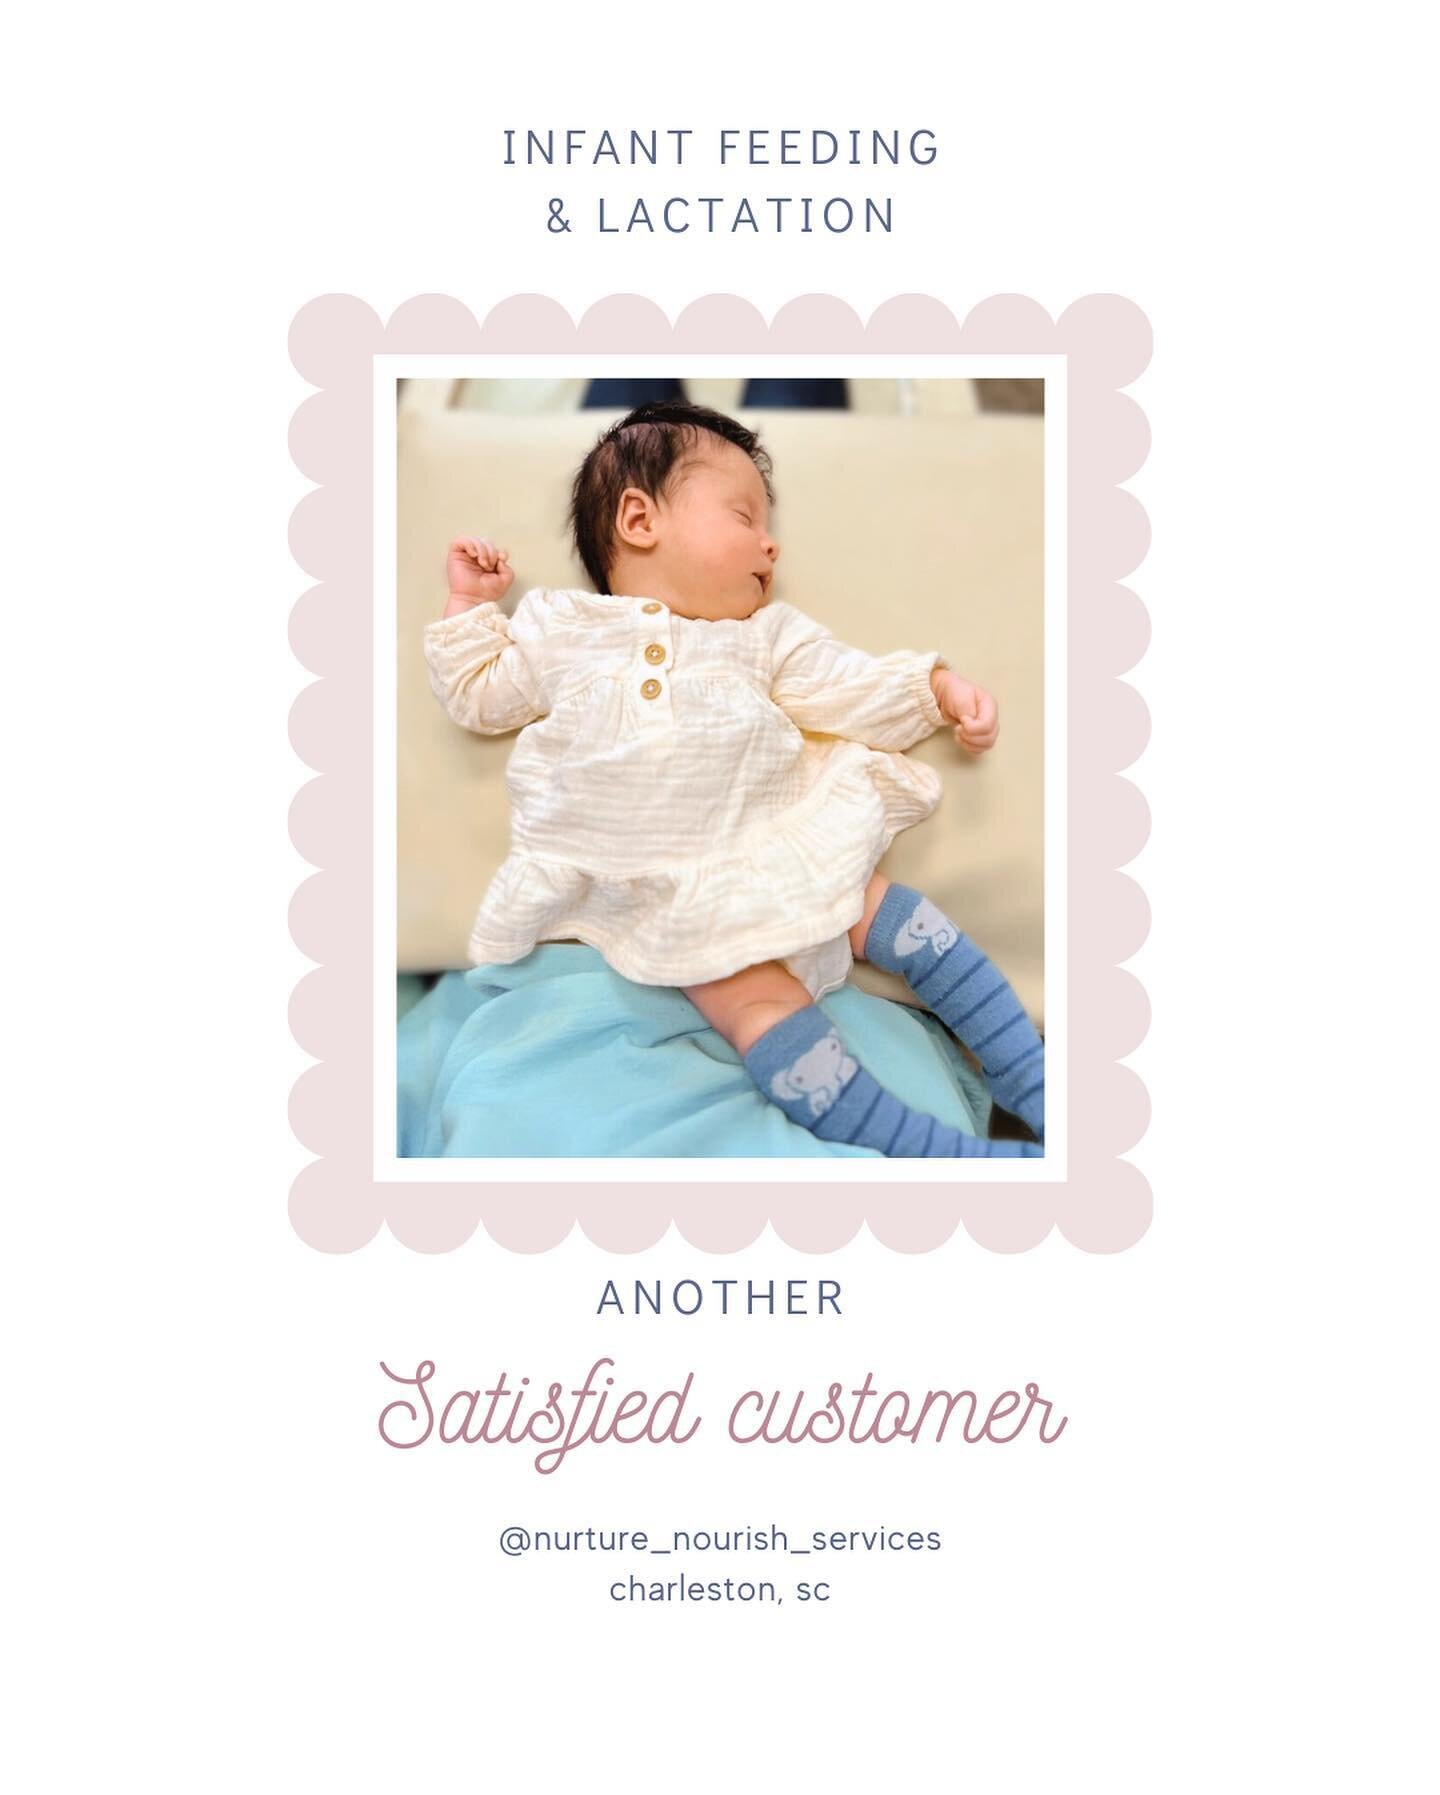 I have a holistic and whole-body approach that has been developed through specialized training in infant development, lactation, bottle feeding, tongue tie, oral sensory integration, and bodywork. With this combination of skills, I offer you comprehe